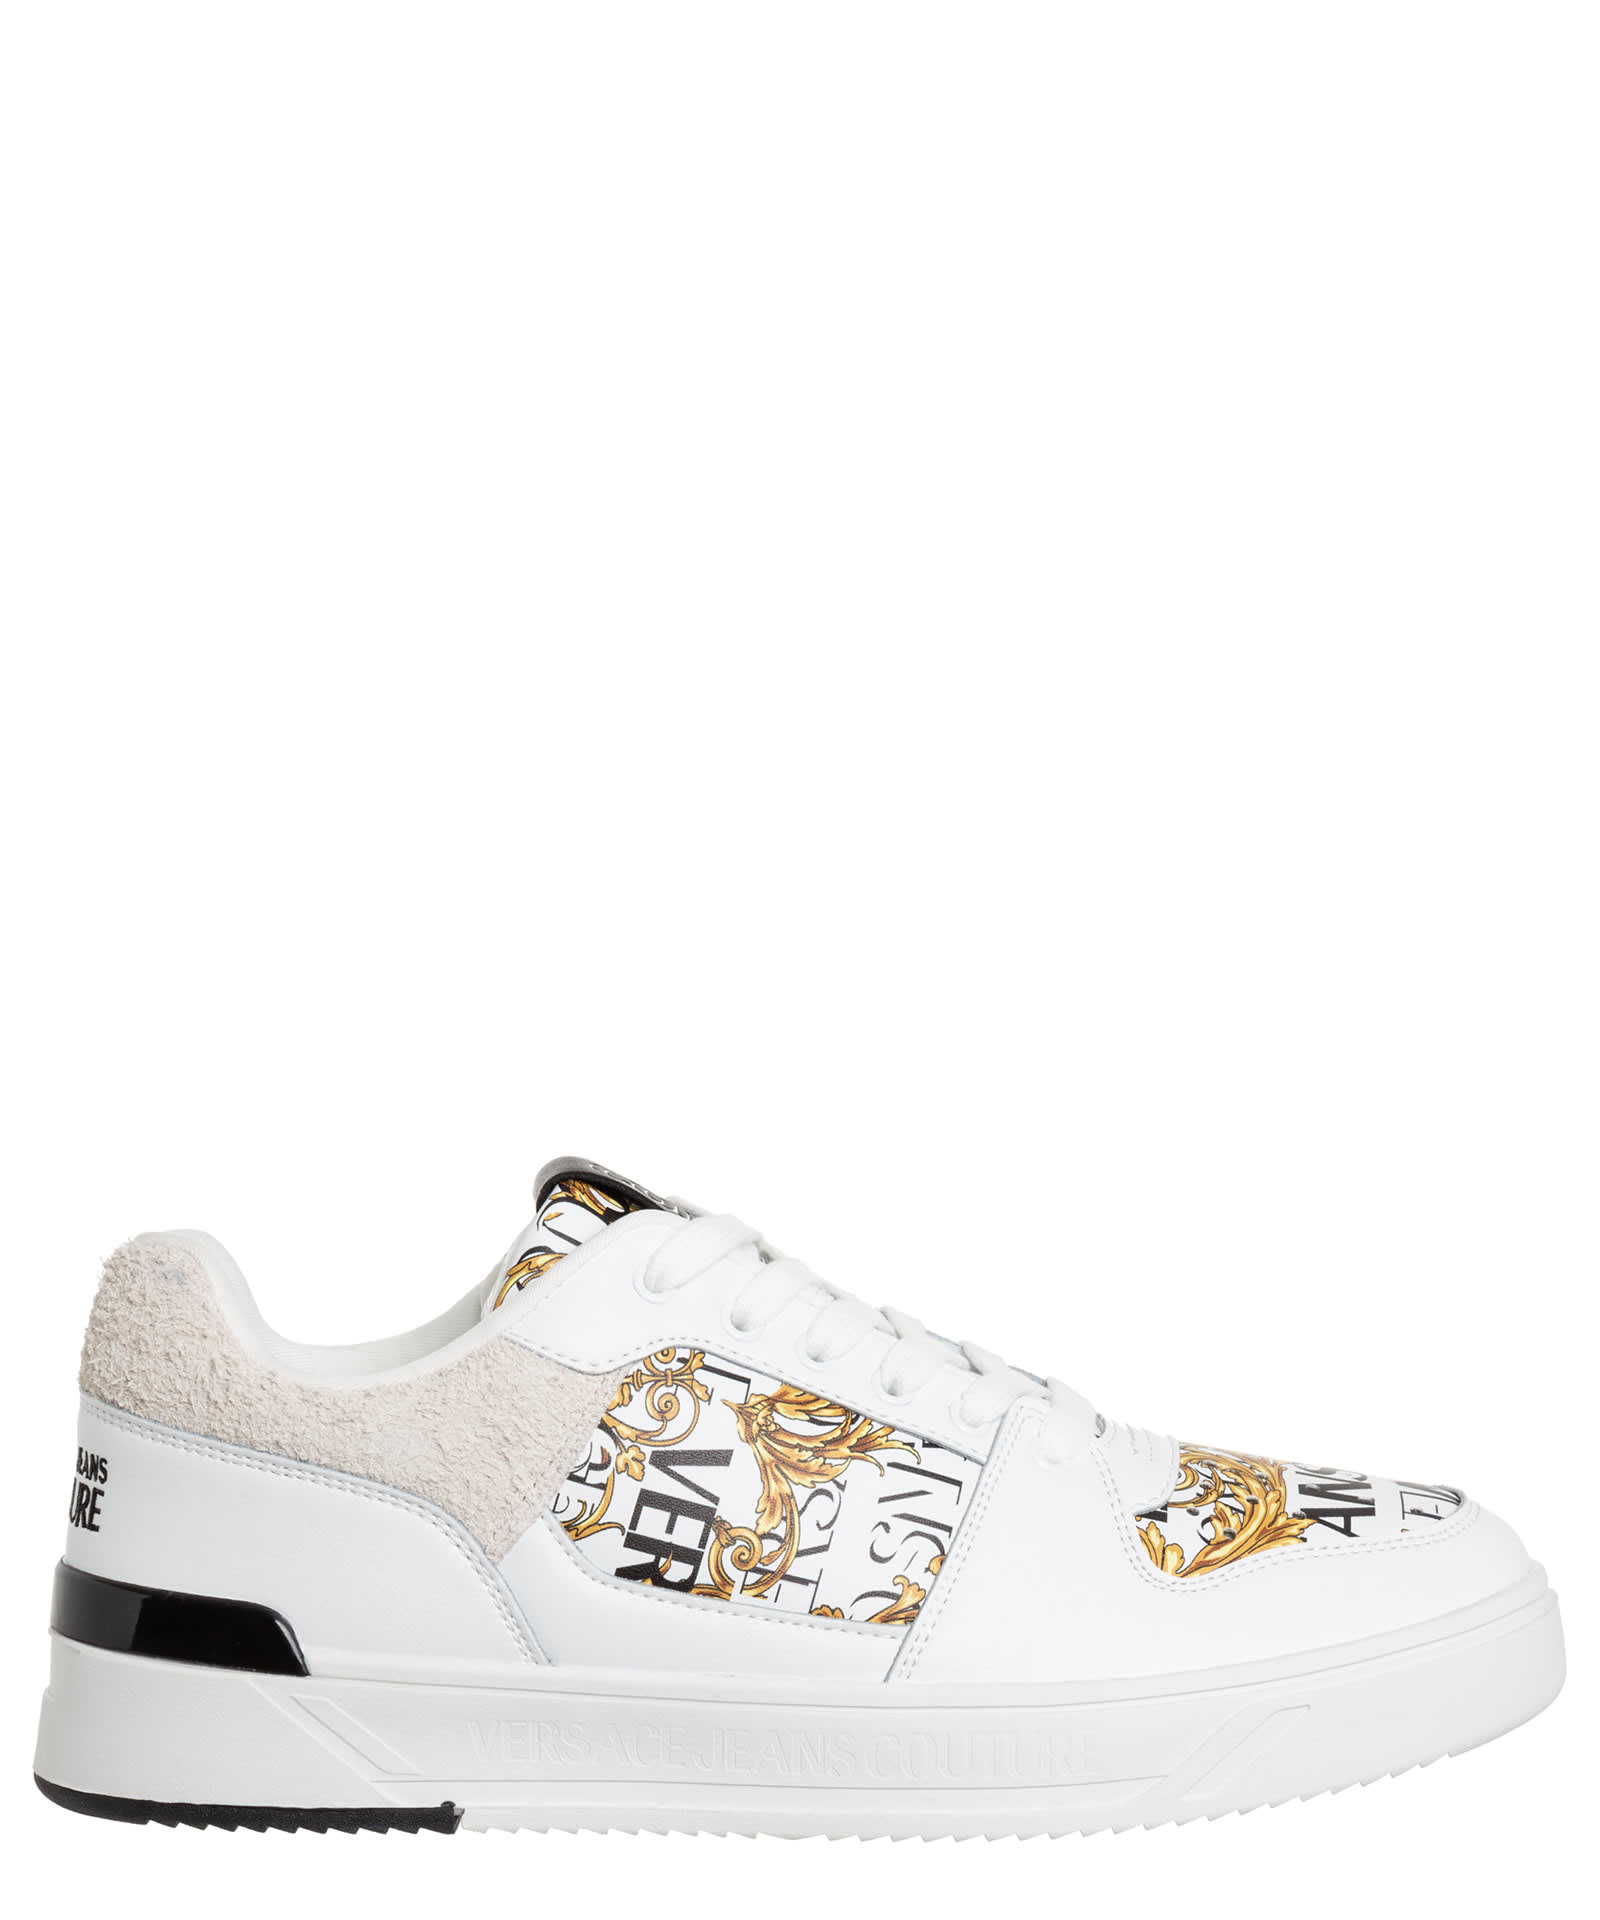 VERSACE JEANS COUTURE STARLIGHT LOGO COUTURE LEATHER SNEAKERS